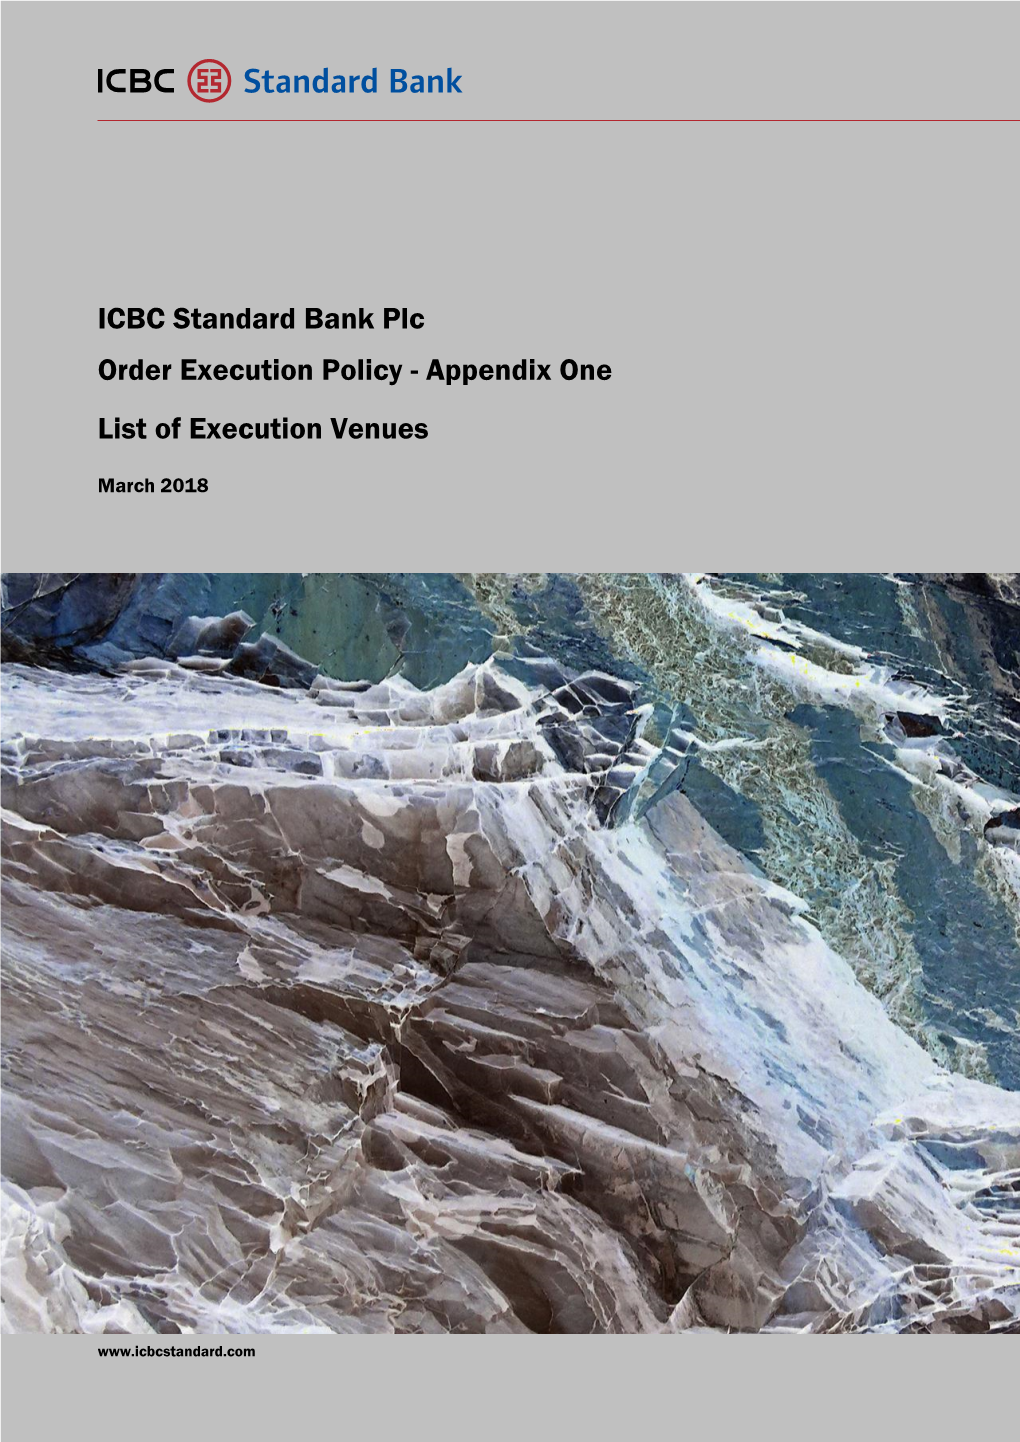 ICBC Standard Bank Plc Order Execution Policy - Appendix One List of Execution Venues